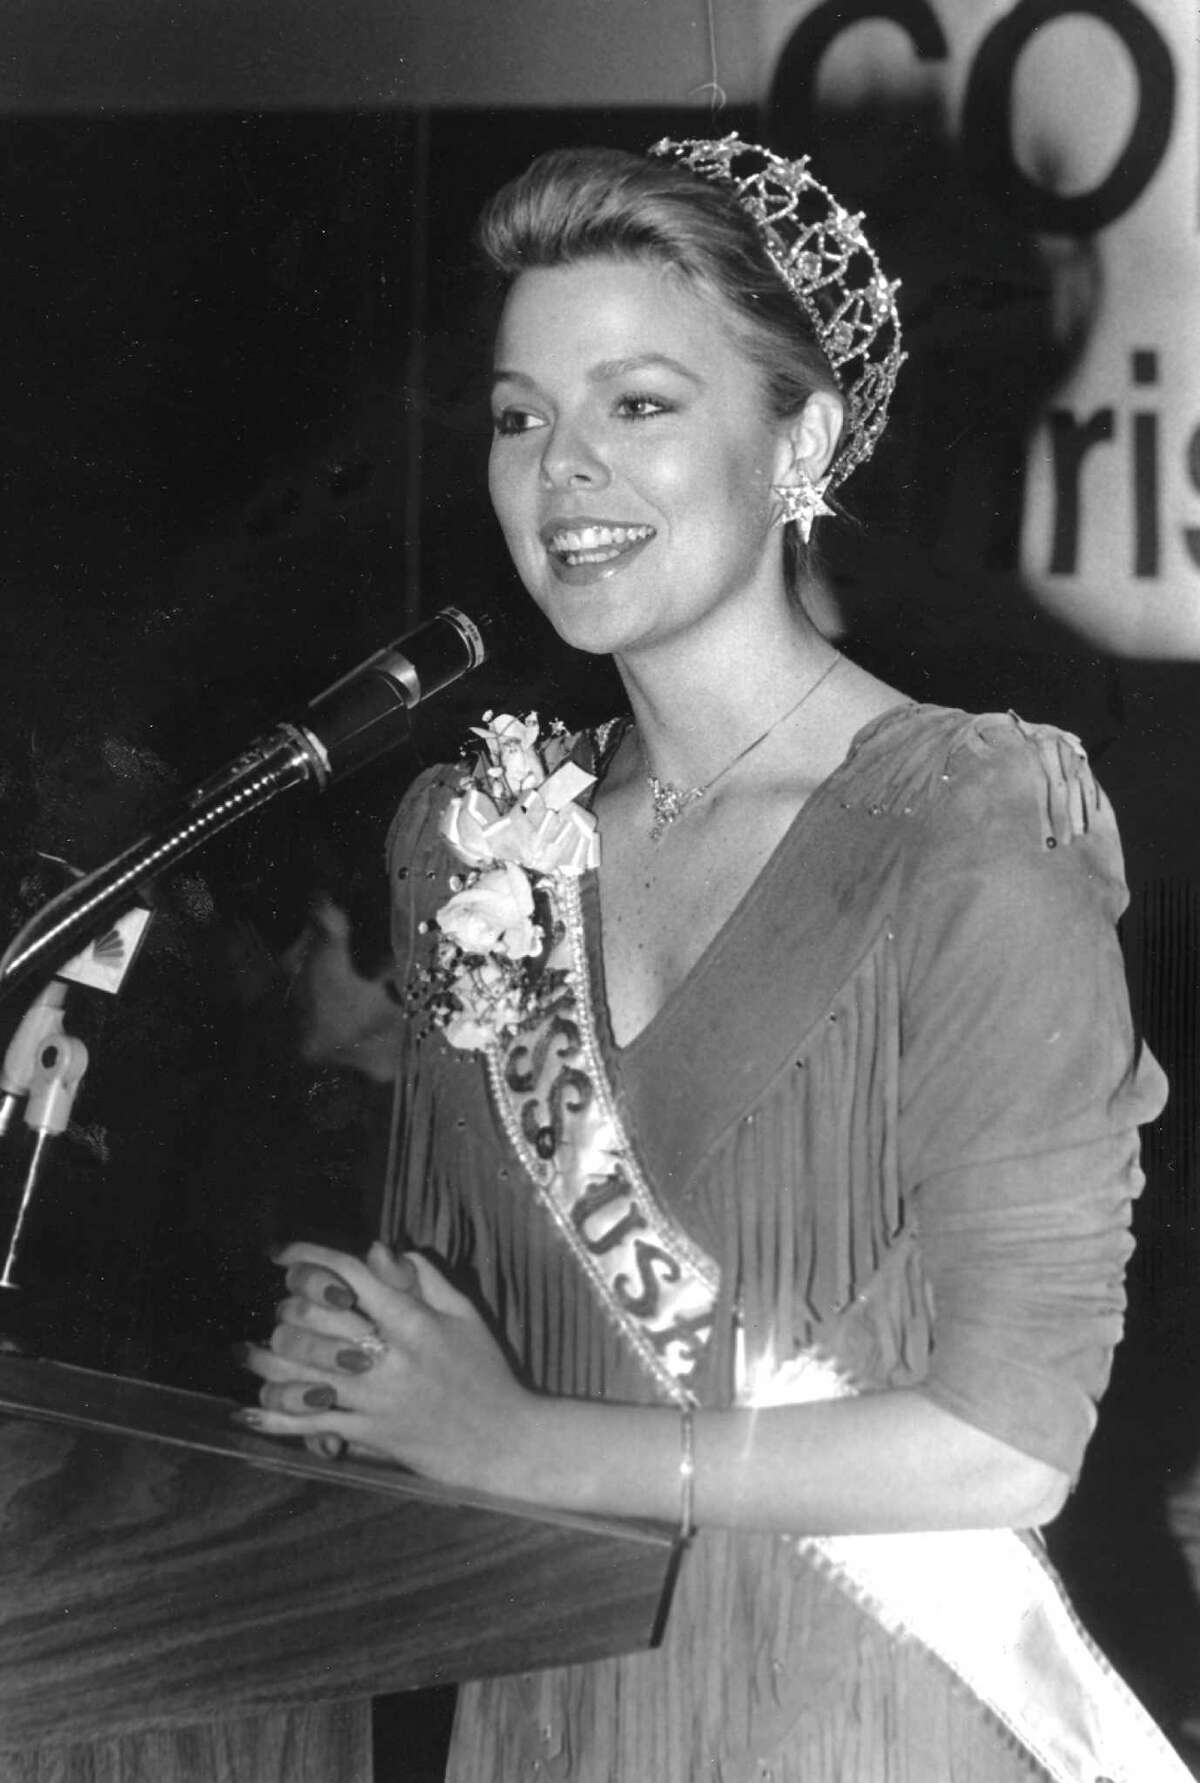 Christy Fichtner, who dated Steve Young as a teenager, returned to Greenwich during her tenure as Miss USA in 1986.